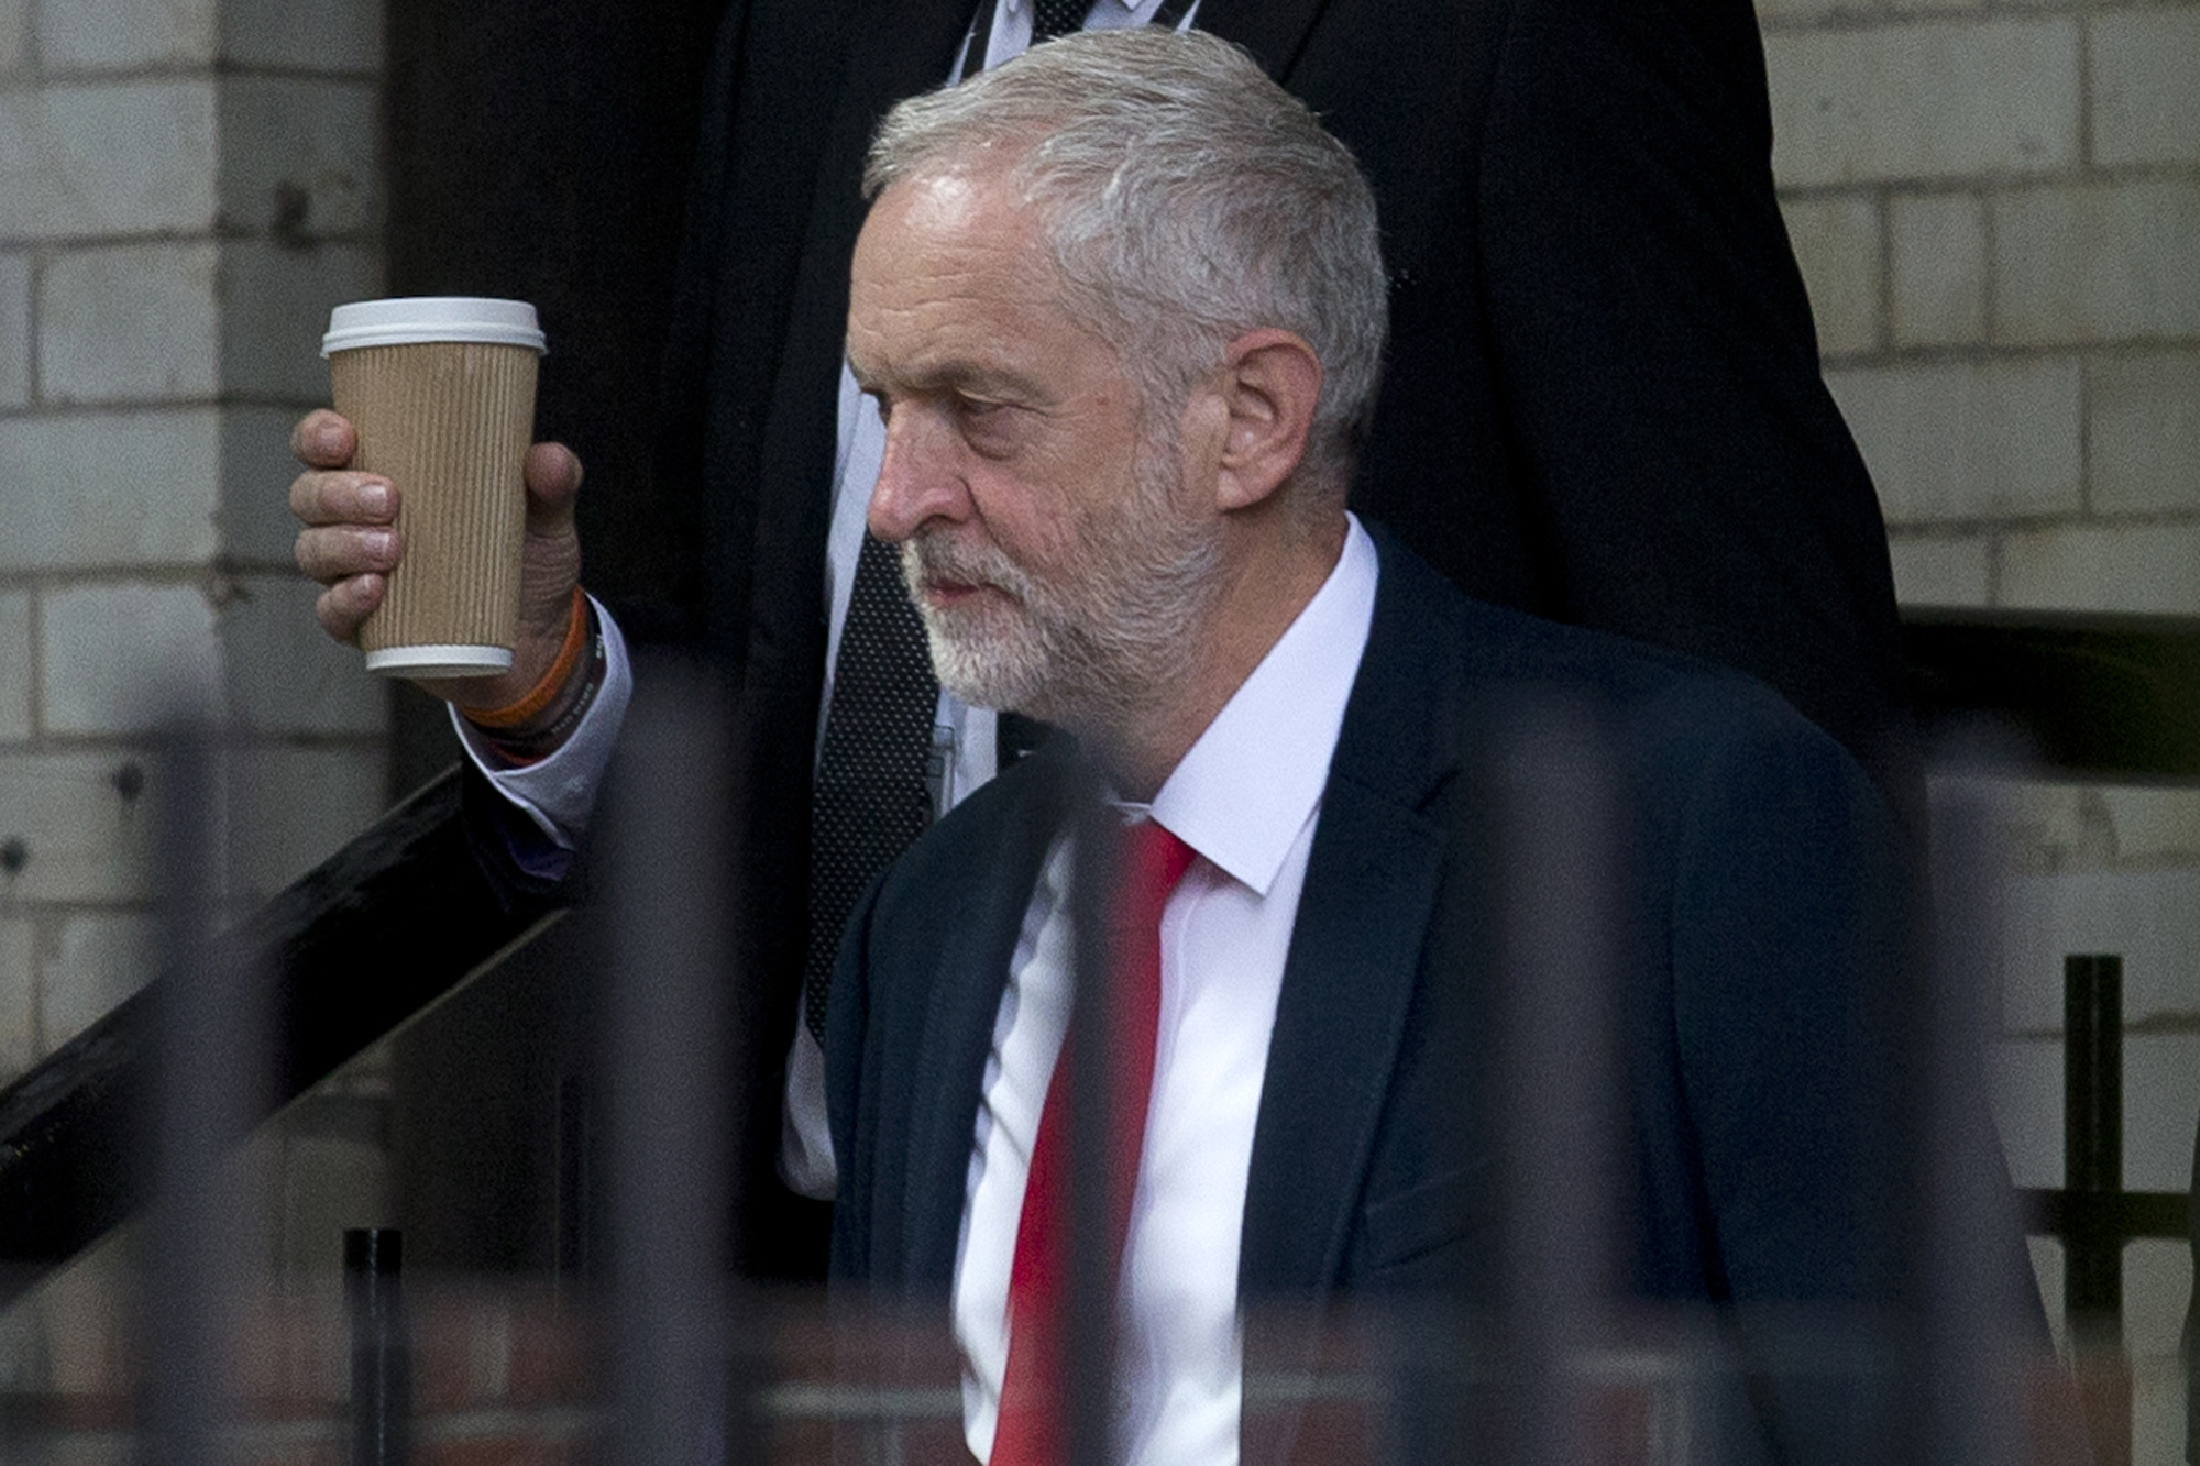 British opposition Labour Party Leader, Jeremy Corbyn makes his way from Portcullis House to the Houses of Parliament in London on June 27, 2016. Top Brexit campaigner Boris Johnson sought Monday to build bridges with Europe and with defeated Britons who voted to remain in the EU in last week's historic referendum. London stocks sank more than 0.8 percent in opening deals on Monday, despite attempts by finance minister George Osborne to calm jitters after last week's shock Brexit vote. / AFP PHOTO / JUSTIN TALLIS